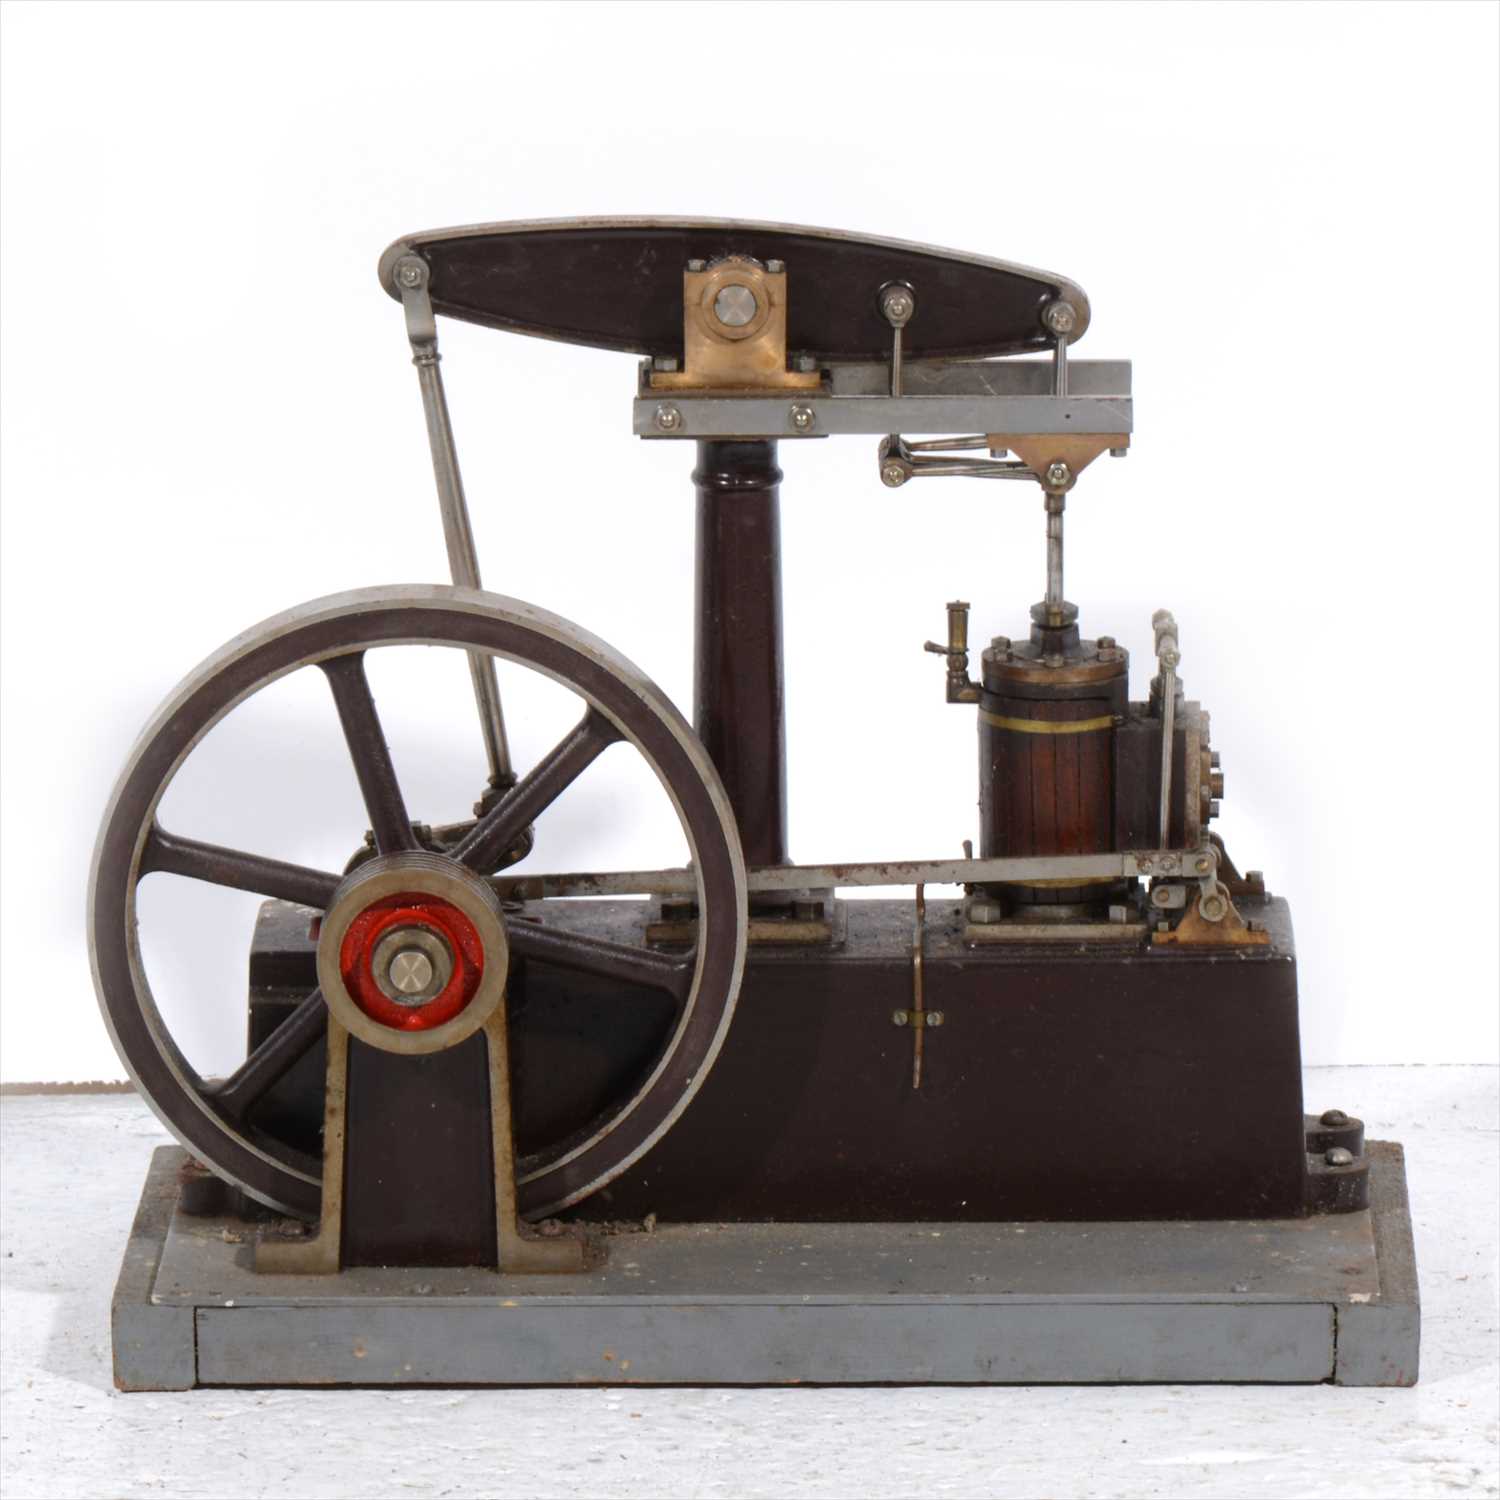 Lot 4 - A Stuart Turner beam engine; live steam model with 7inch flywheel, mounted into wooden base, 32cm length.